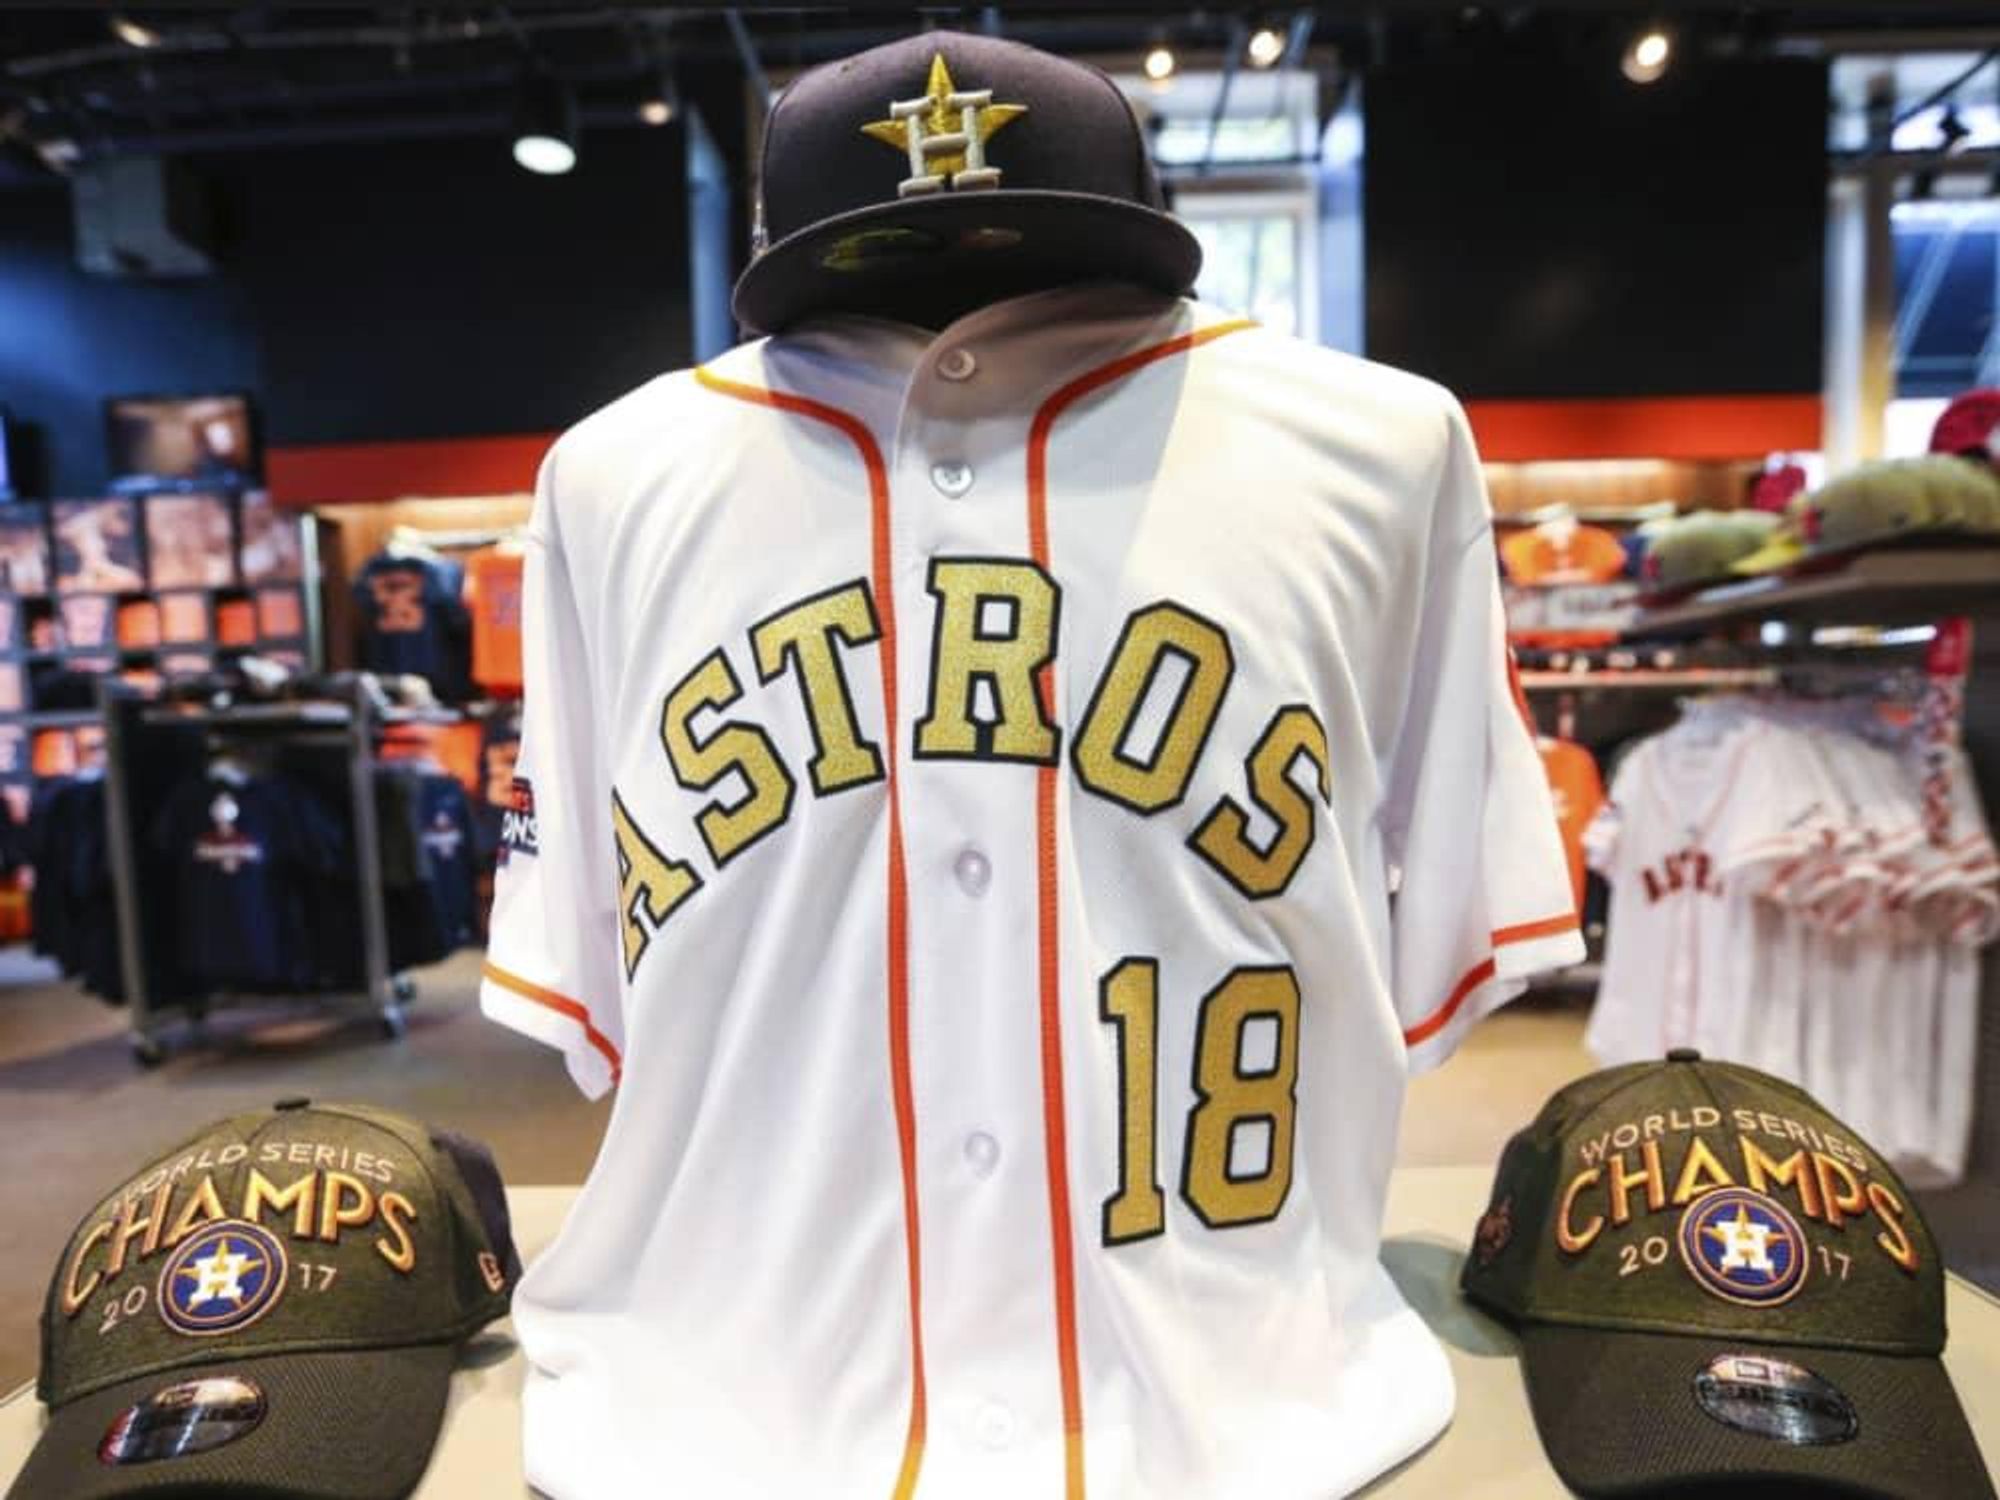 🔒 Here's a chance to win a Houston Astros 'Space City' jersey and